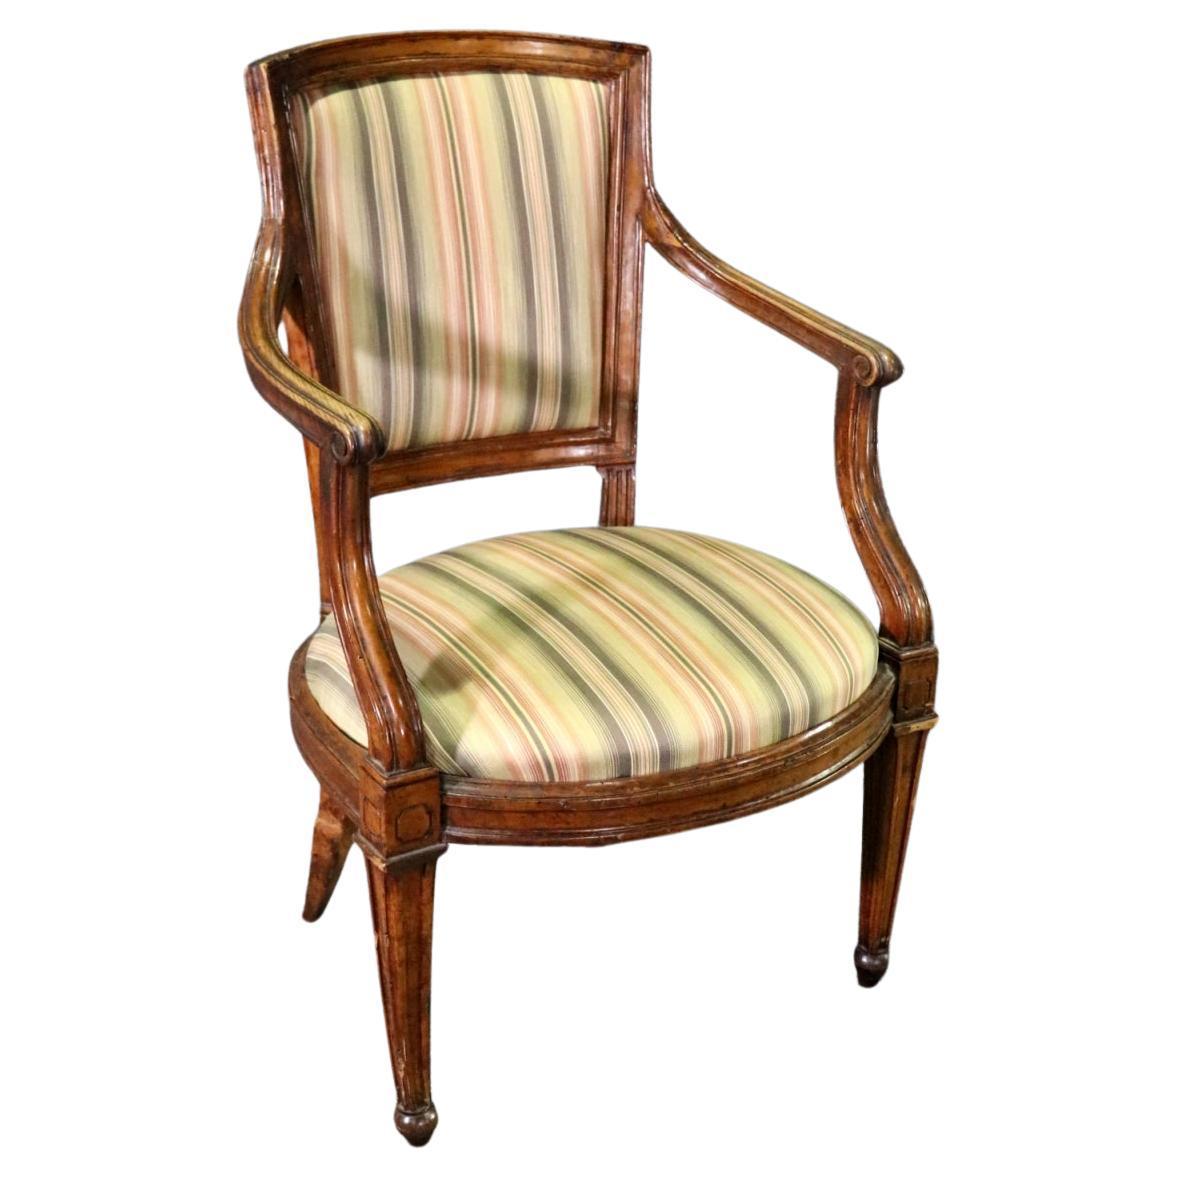 Period Antique Directoire French Louis XVI Walnut Armchair For Sale